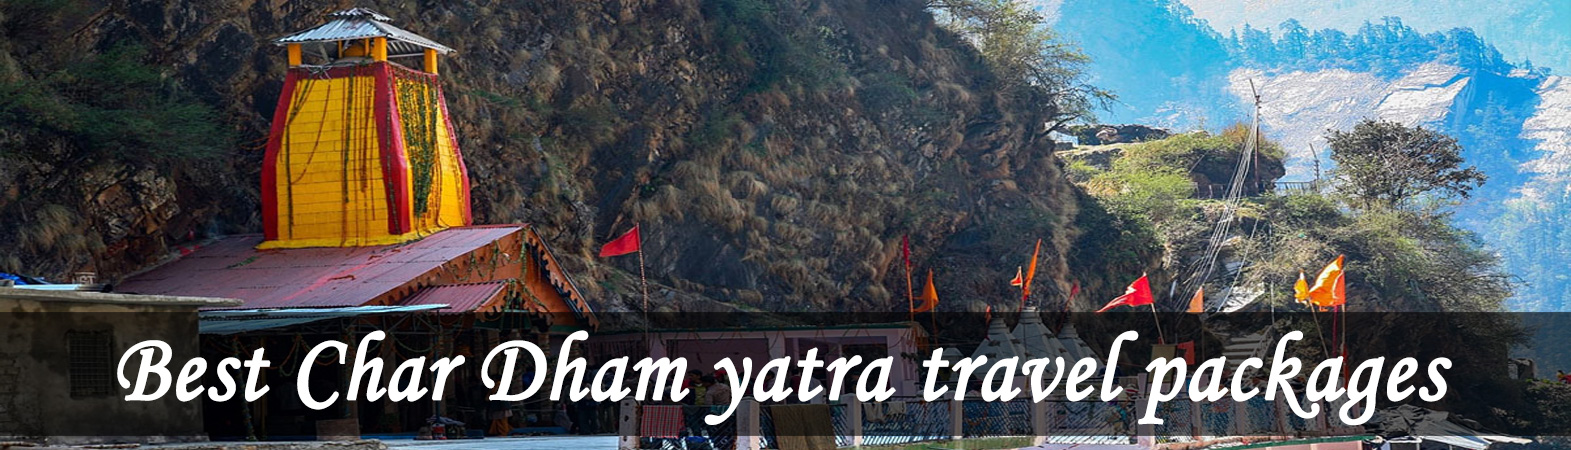 Tour Package in Uttarakhand - joshimath Tour package - Auli Tour package